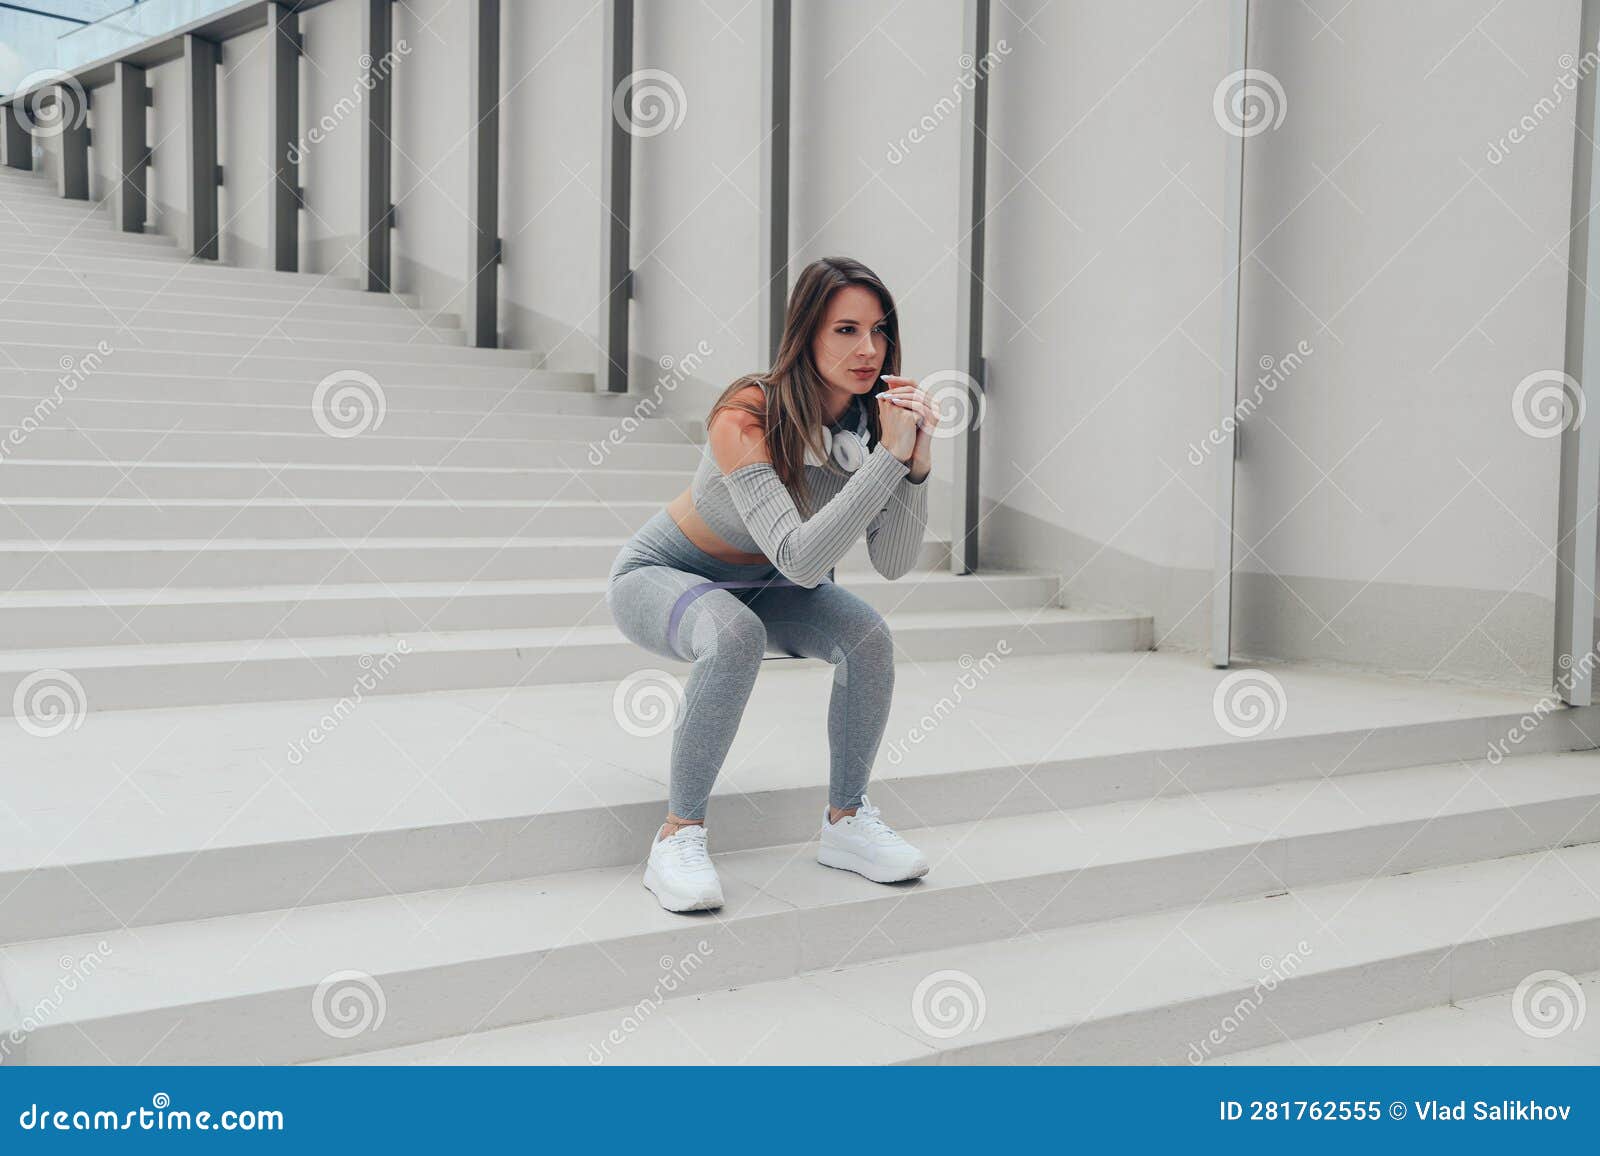 Sporty Athletic Woman In Grey Sportswear Doing Squatting With Gymnastic Elastic Bands Sit Ups